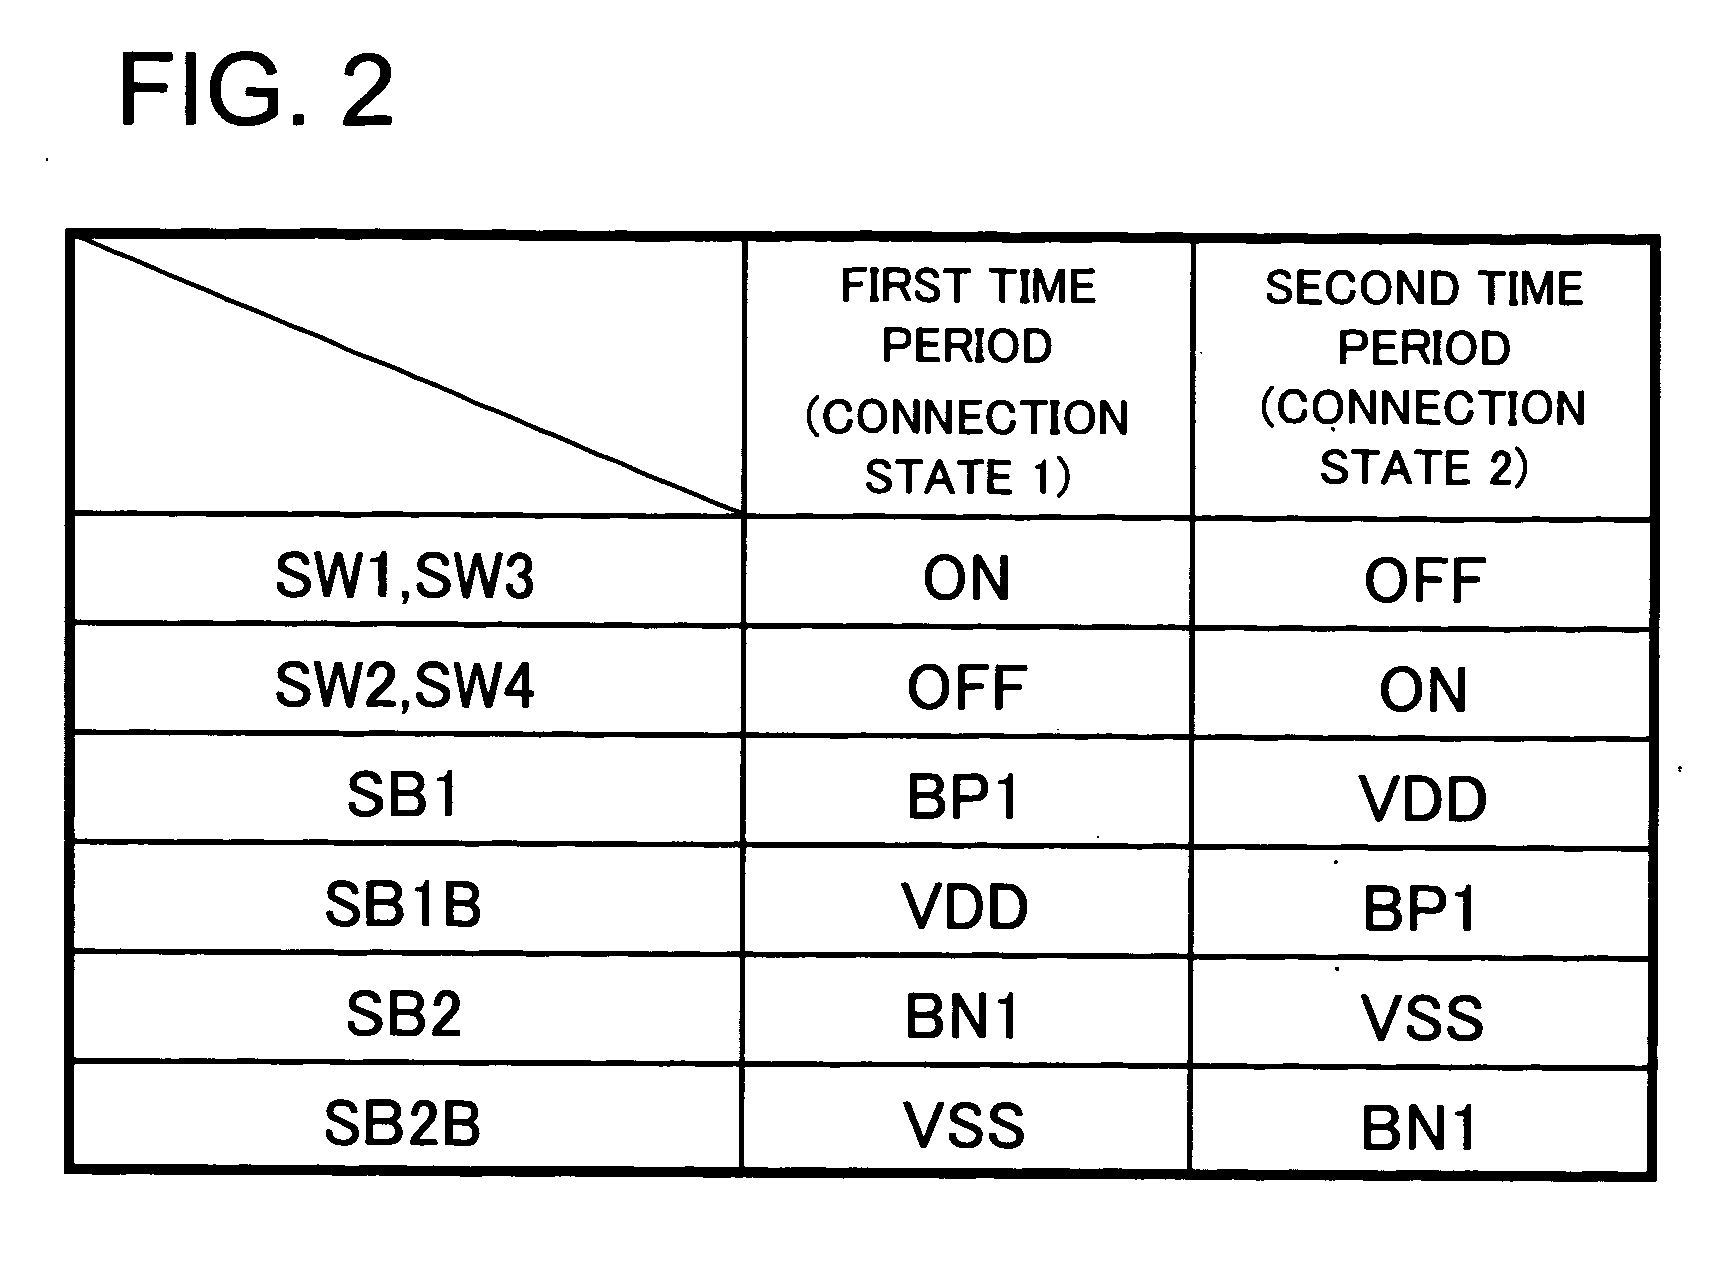 Differential amplifier, data driver and display device